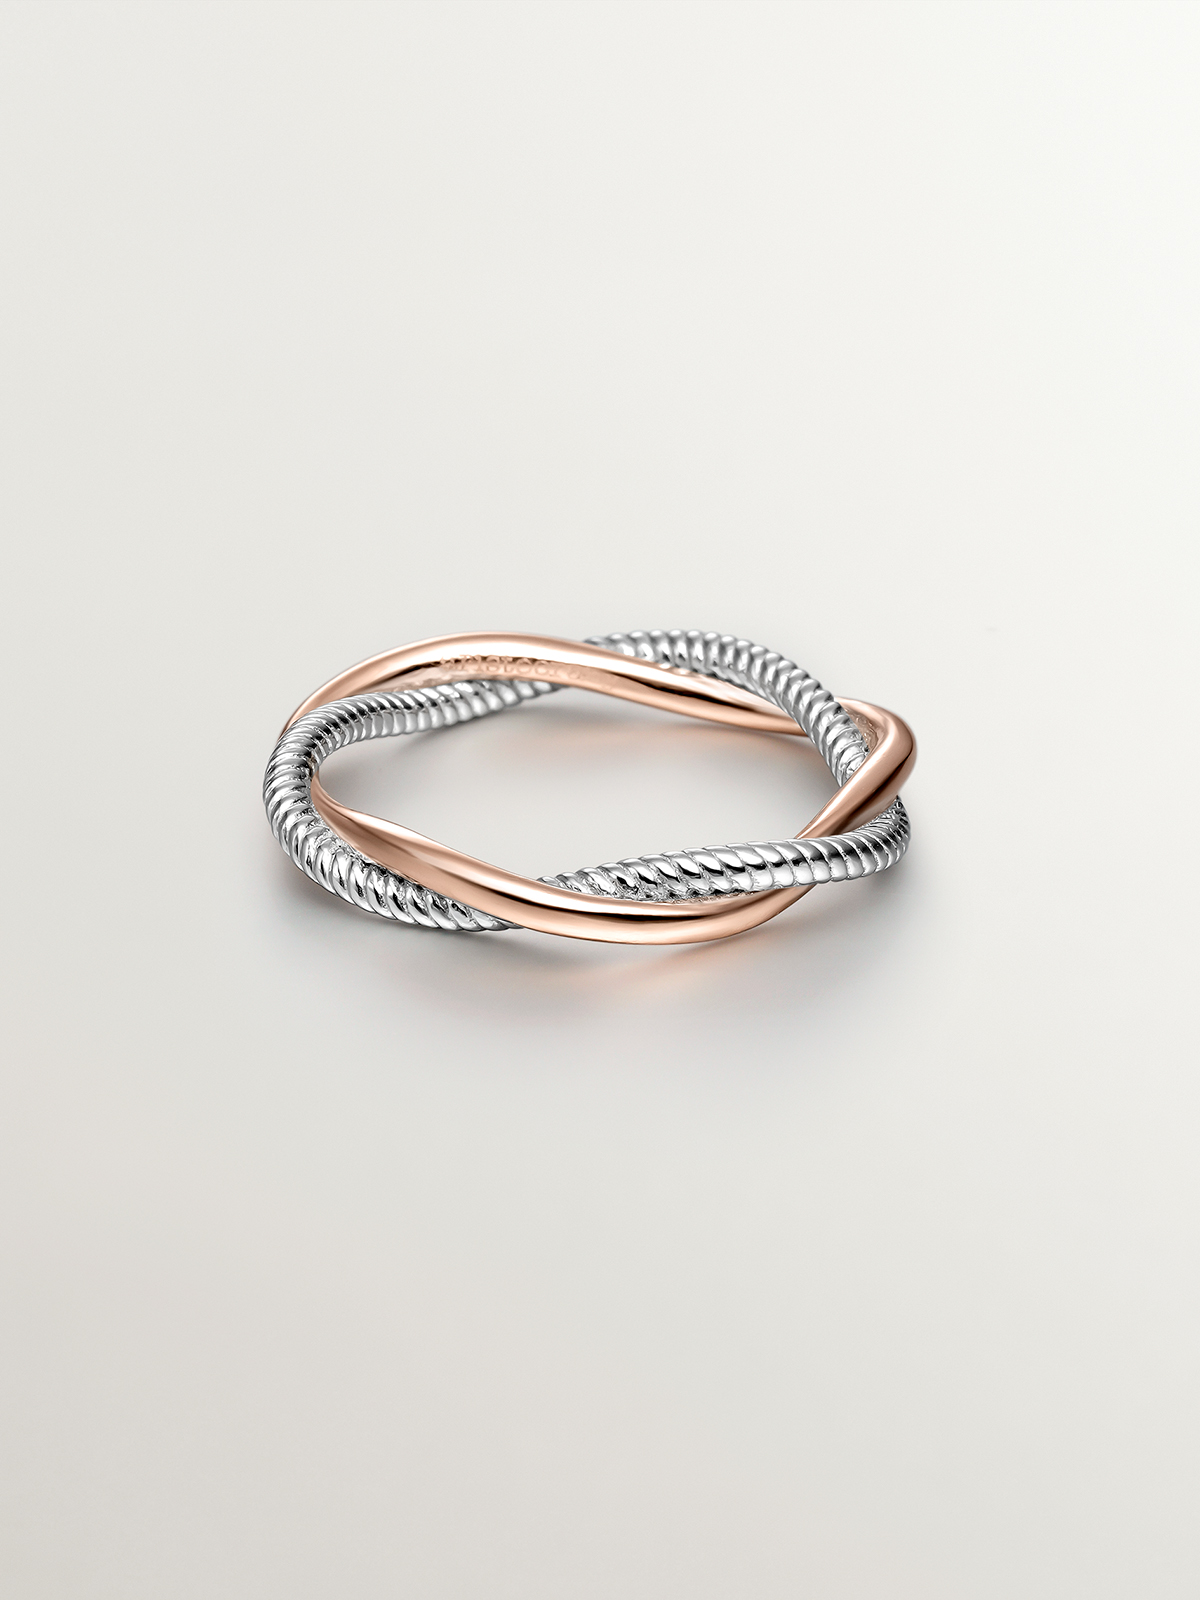 Double twisted ring made of 925 silver bathed in 18K rose gold.